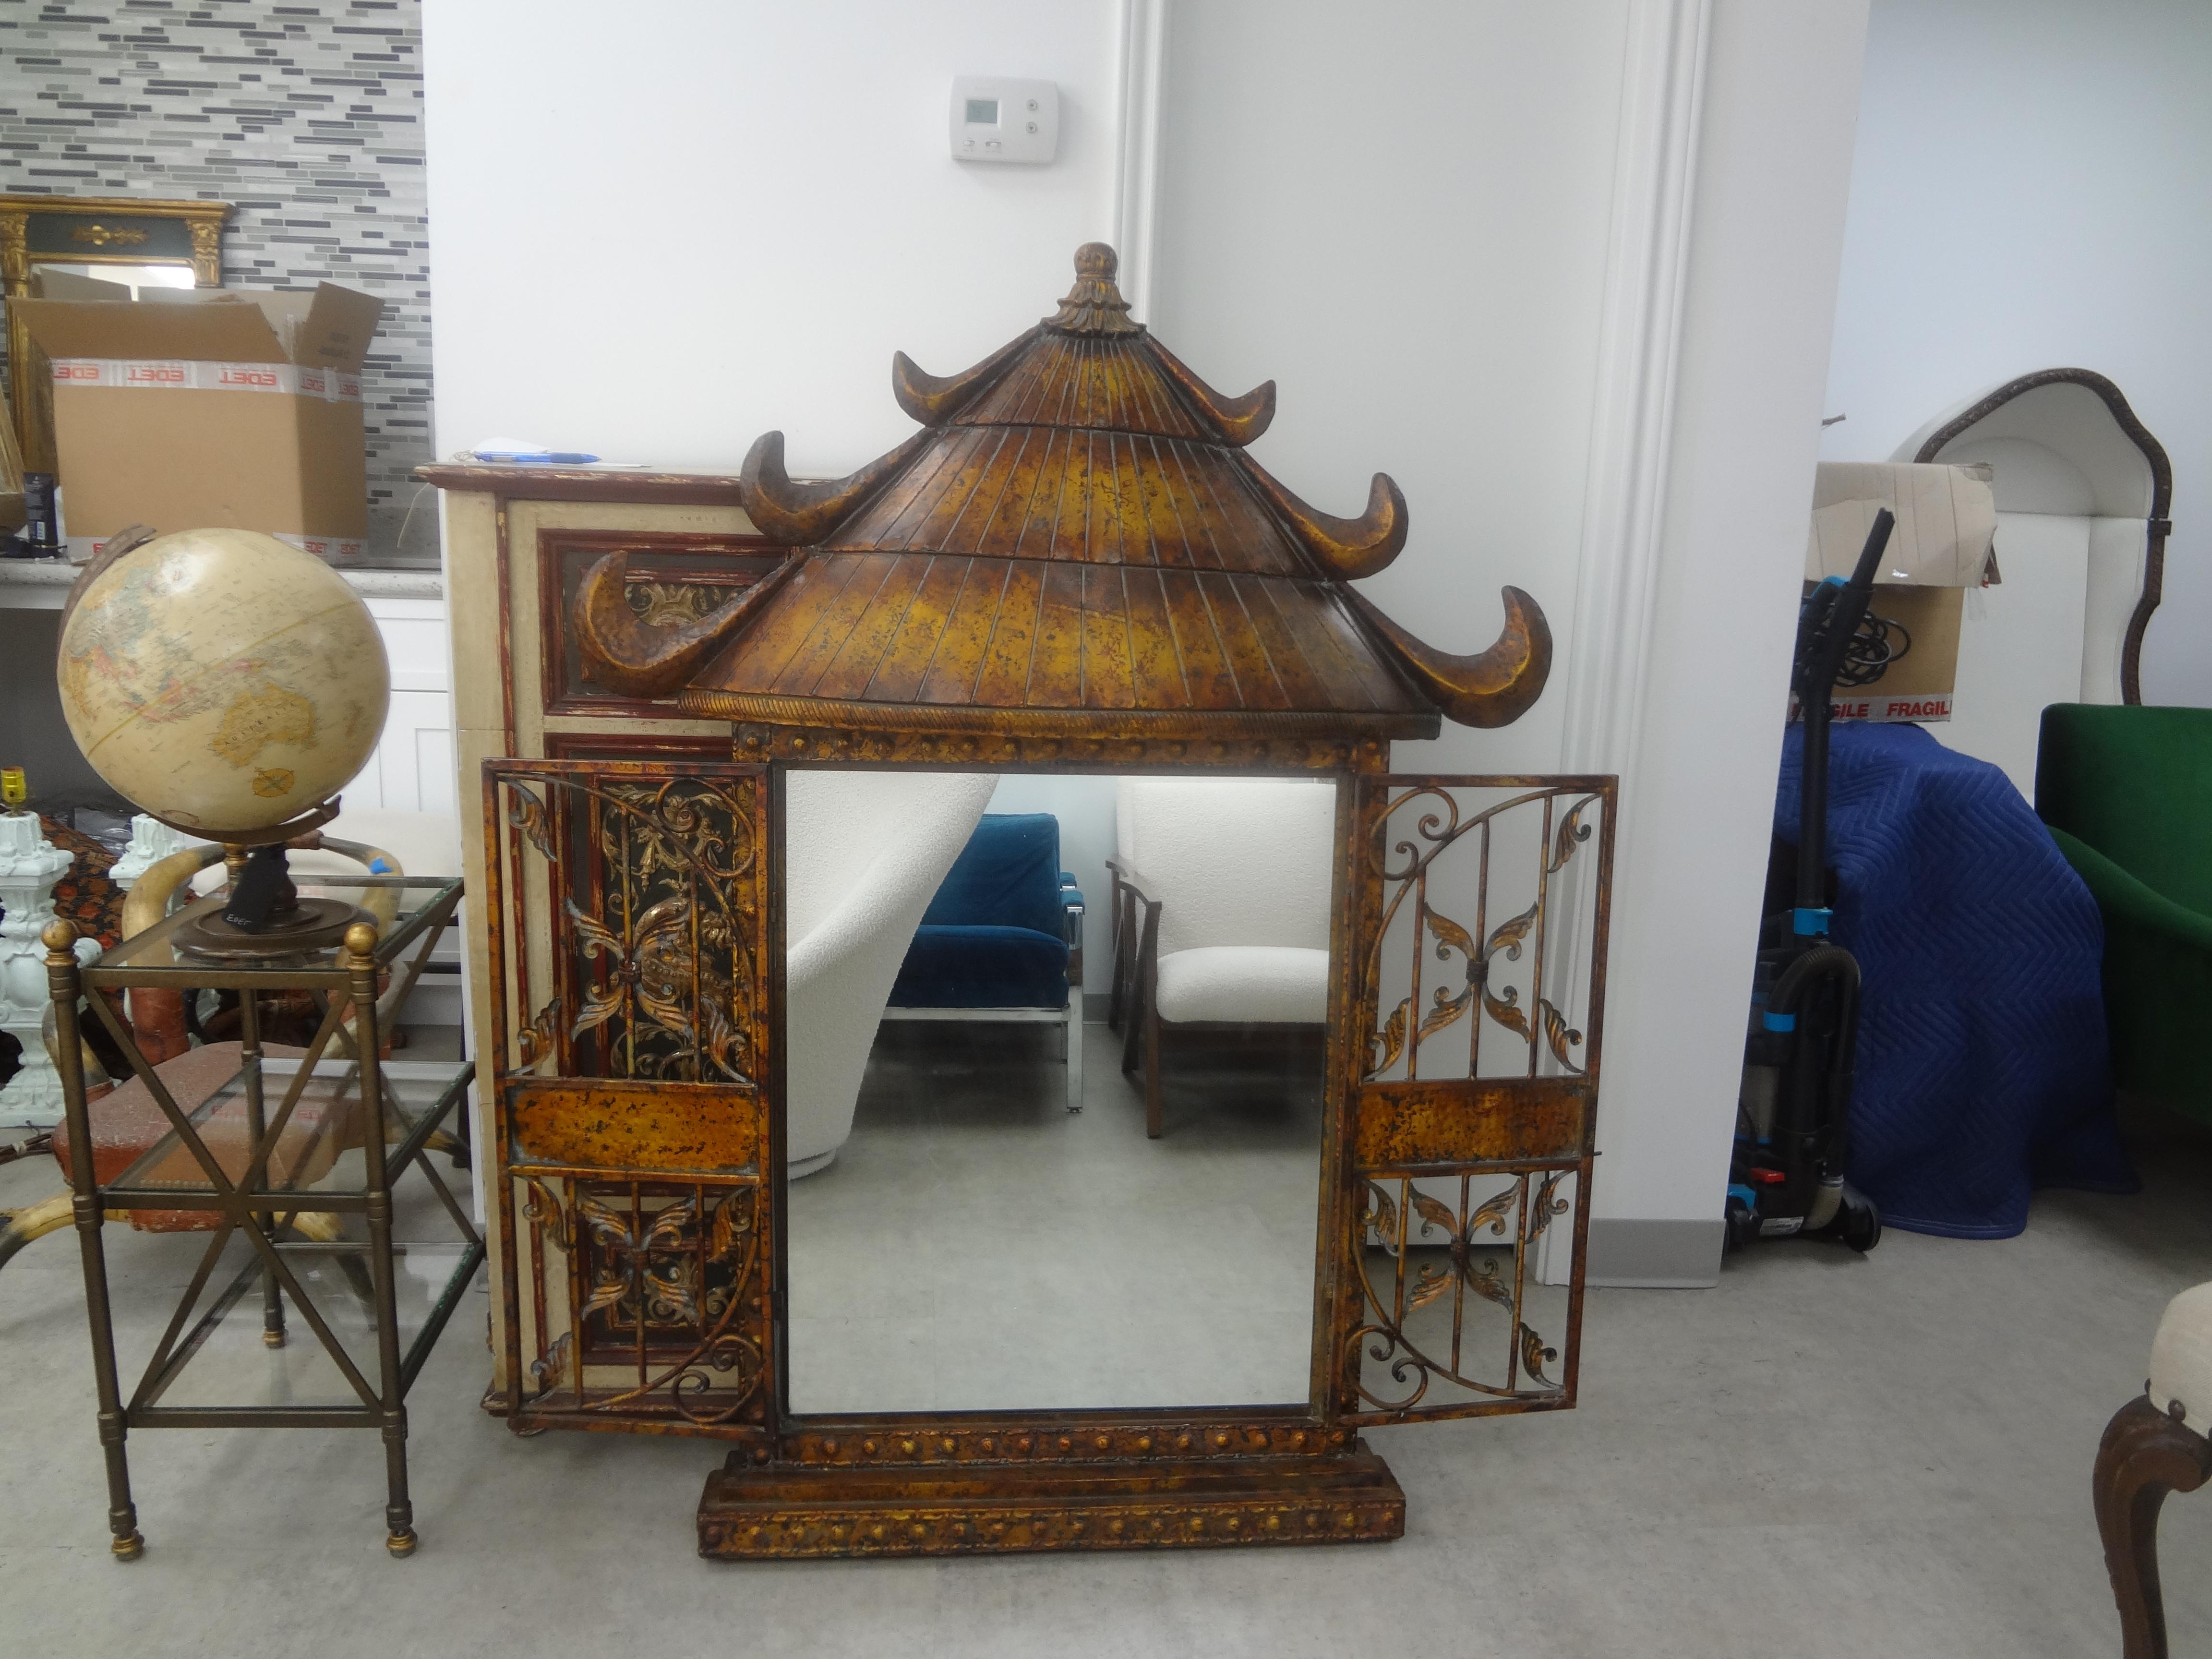 Vintage gilt metal pagoda mirror.
This stunning Hollywood Regency style gilt metal mirror in the shape of a pagoda has two doors that can either stay open or latch closed. Each door has beautifully detailing and lions head motif.
